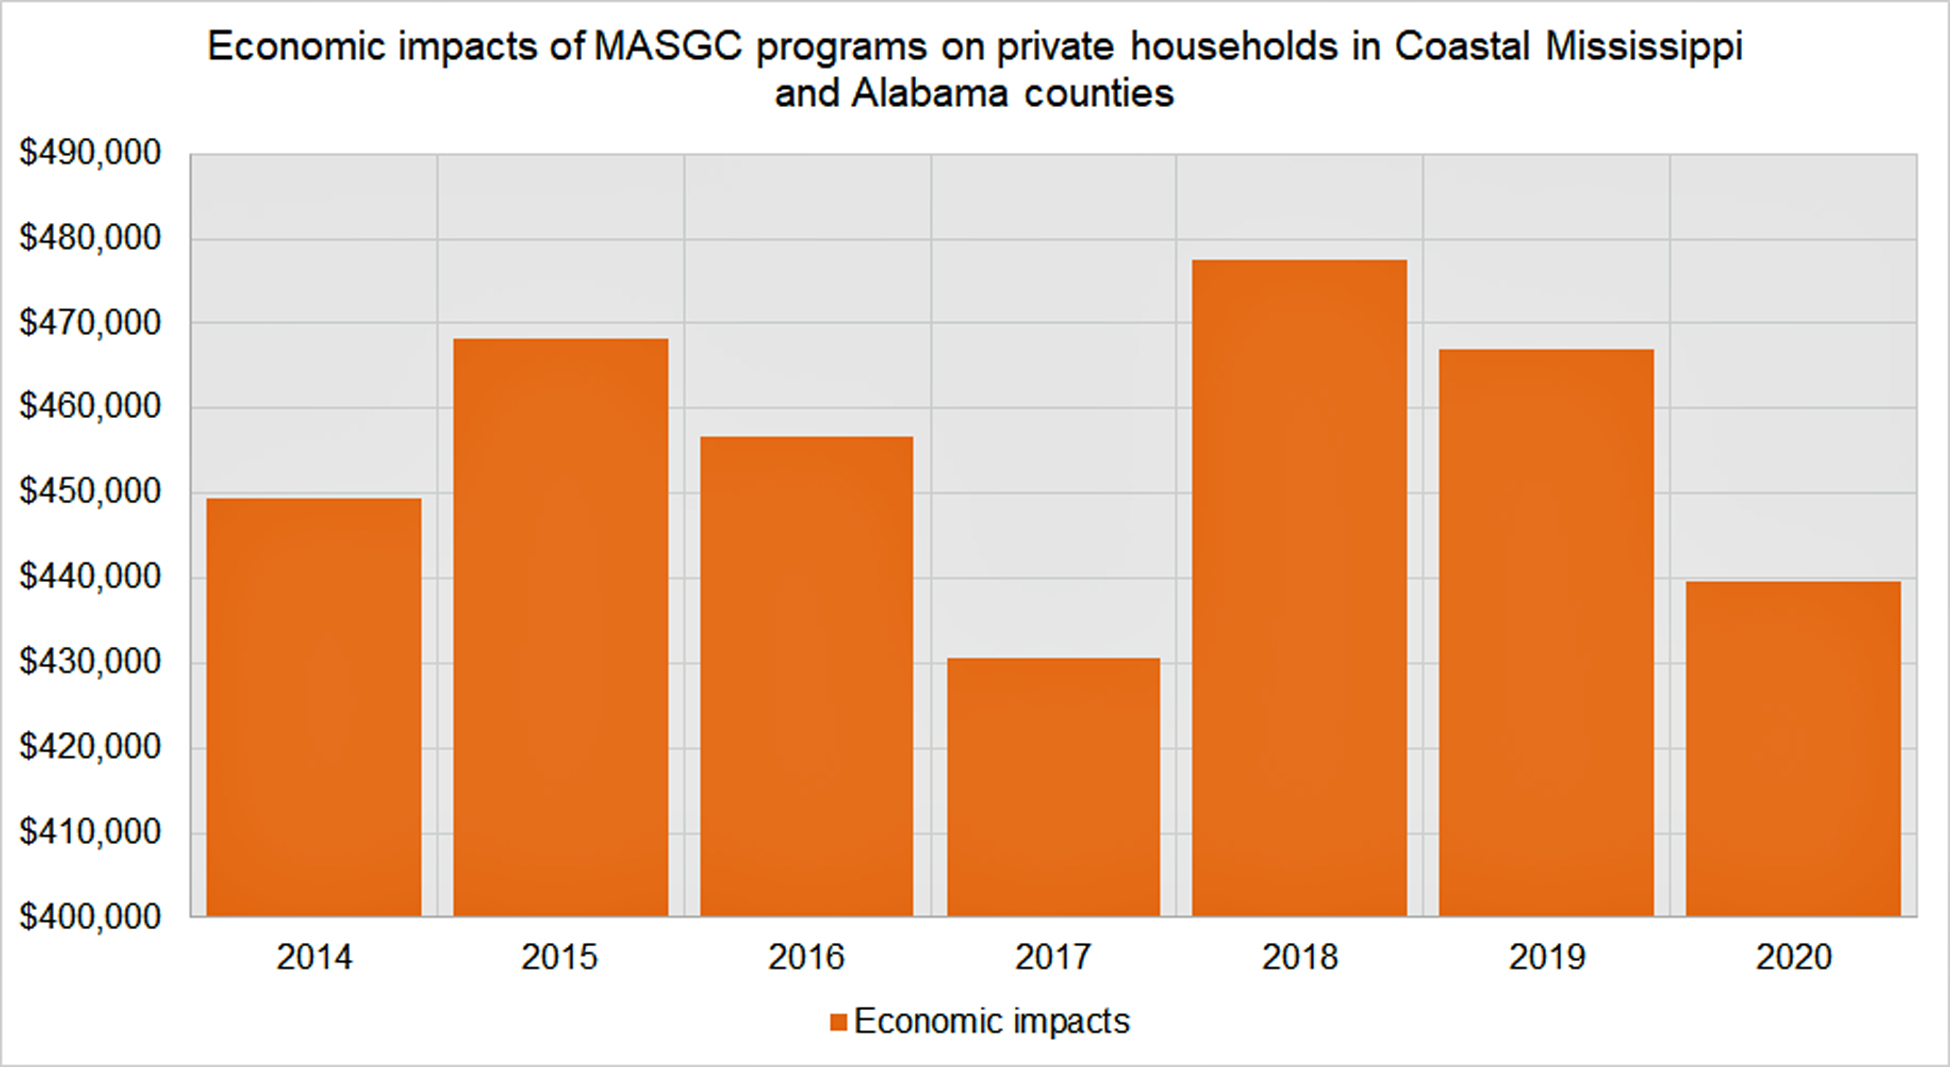 economic_impacts_of_masgc_programs_on_private_households_in_coastal_ms_and_al.jpg